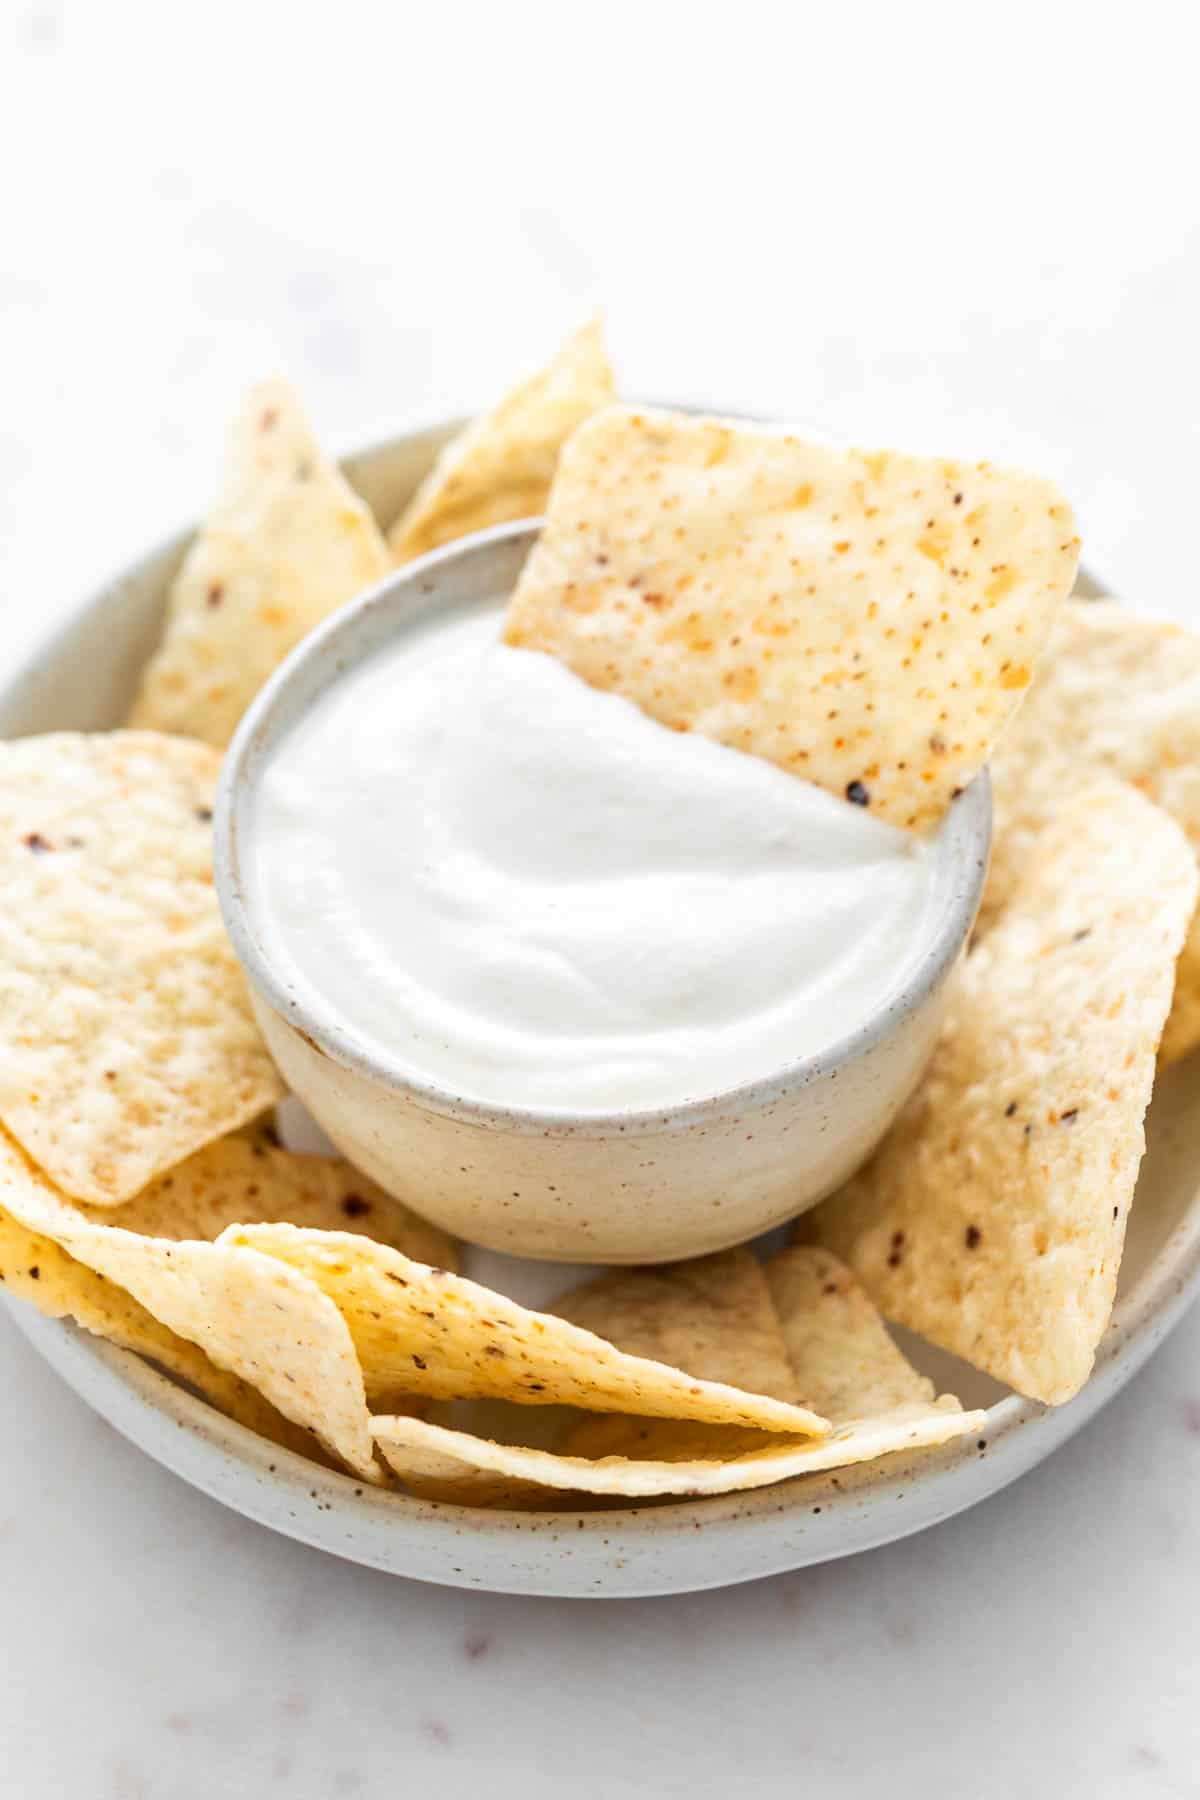 Vegan sour cream topped with a tortilla chip for dipping.